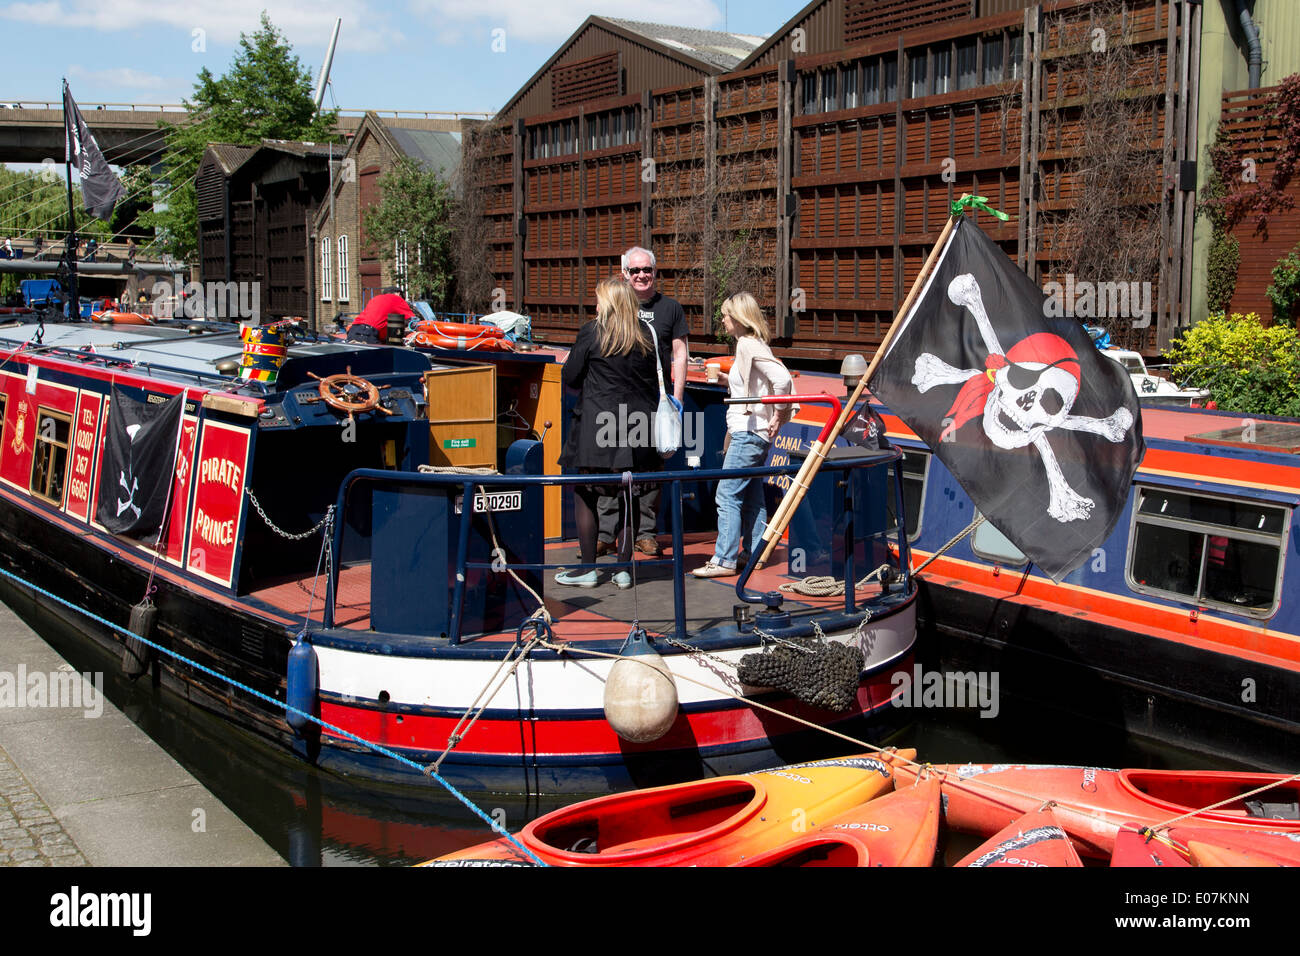 2014 Canalway Cavalcade a waterway festival, Little Venice London, UK. Stock Photo